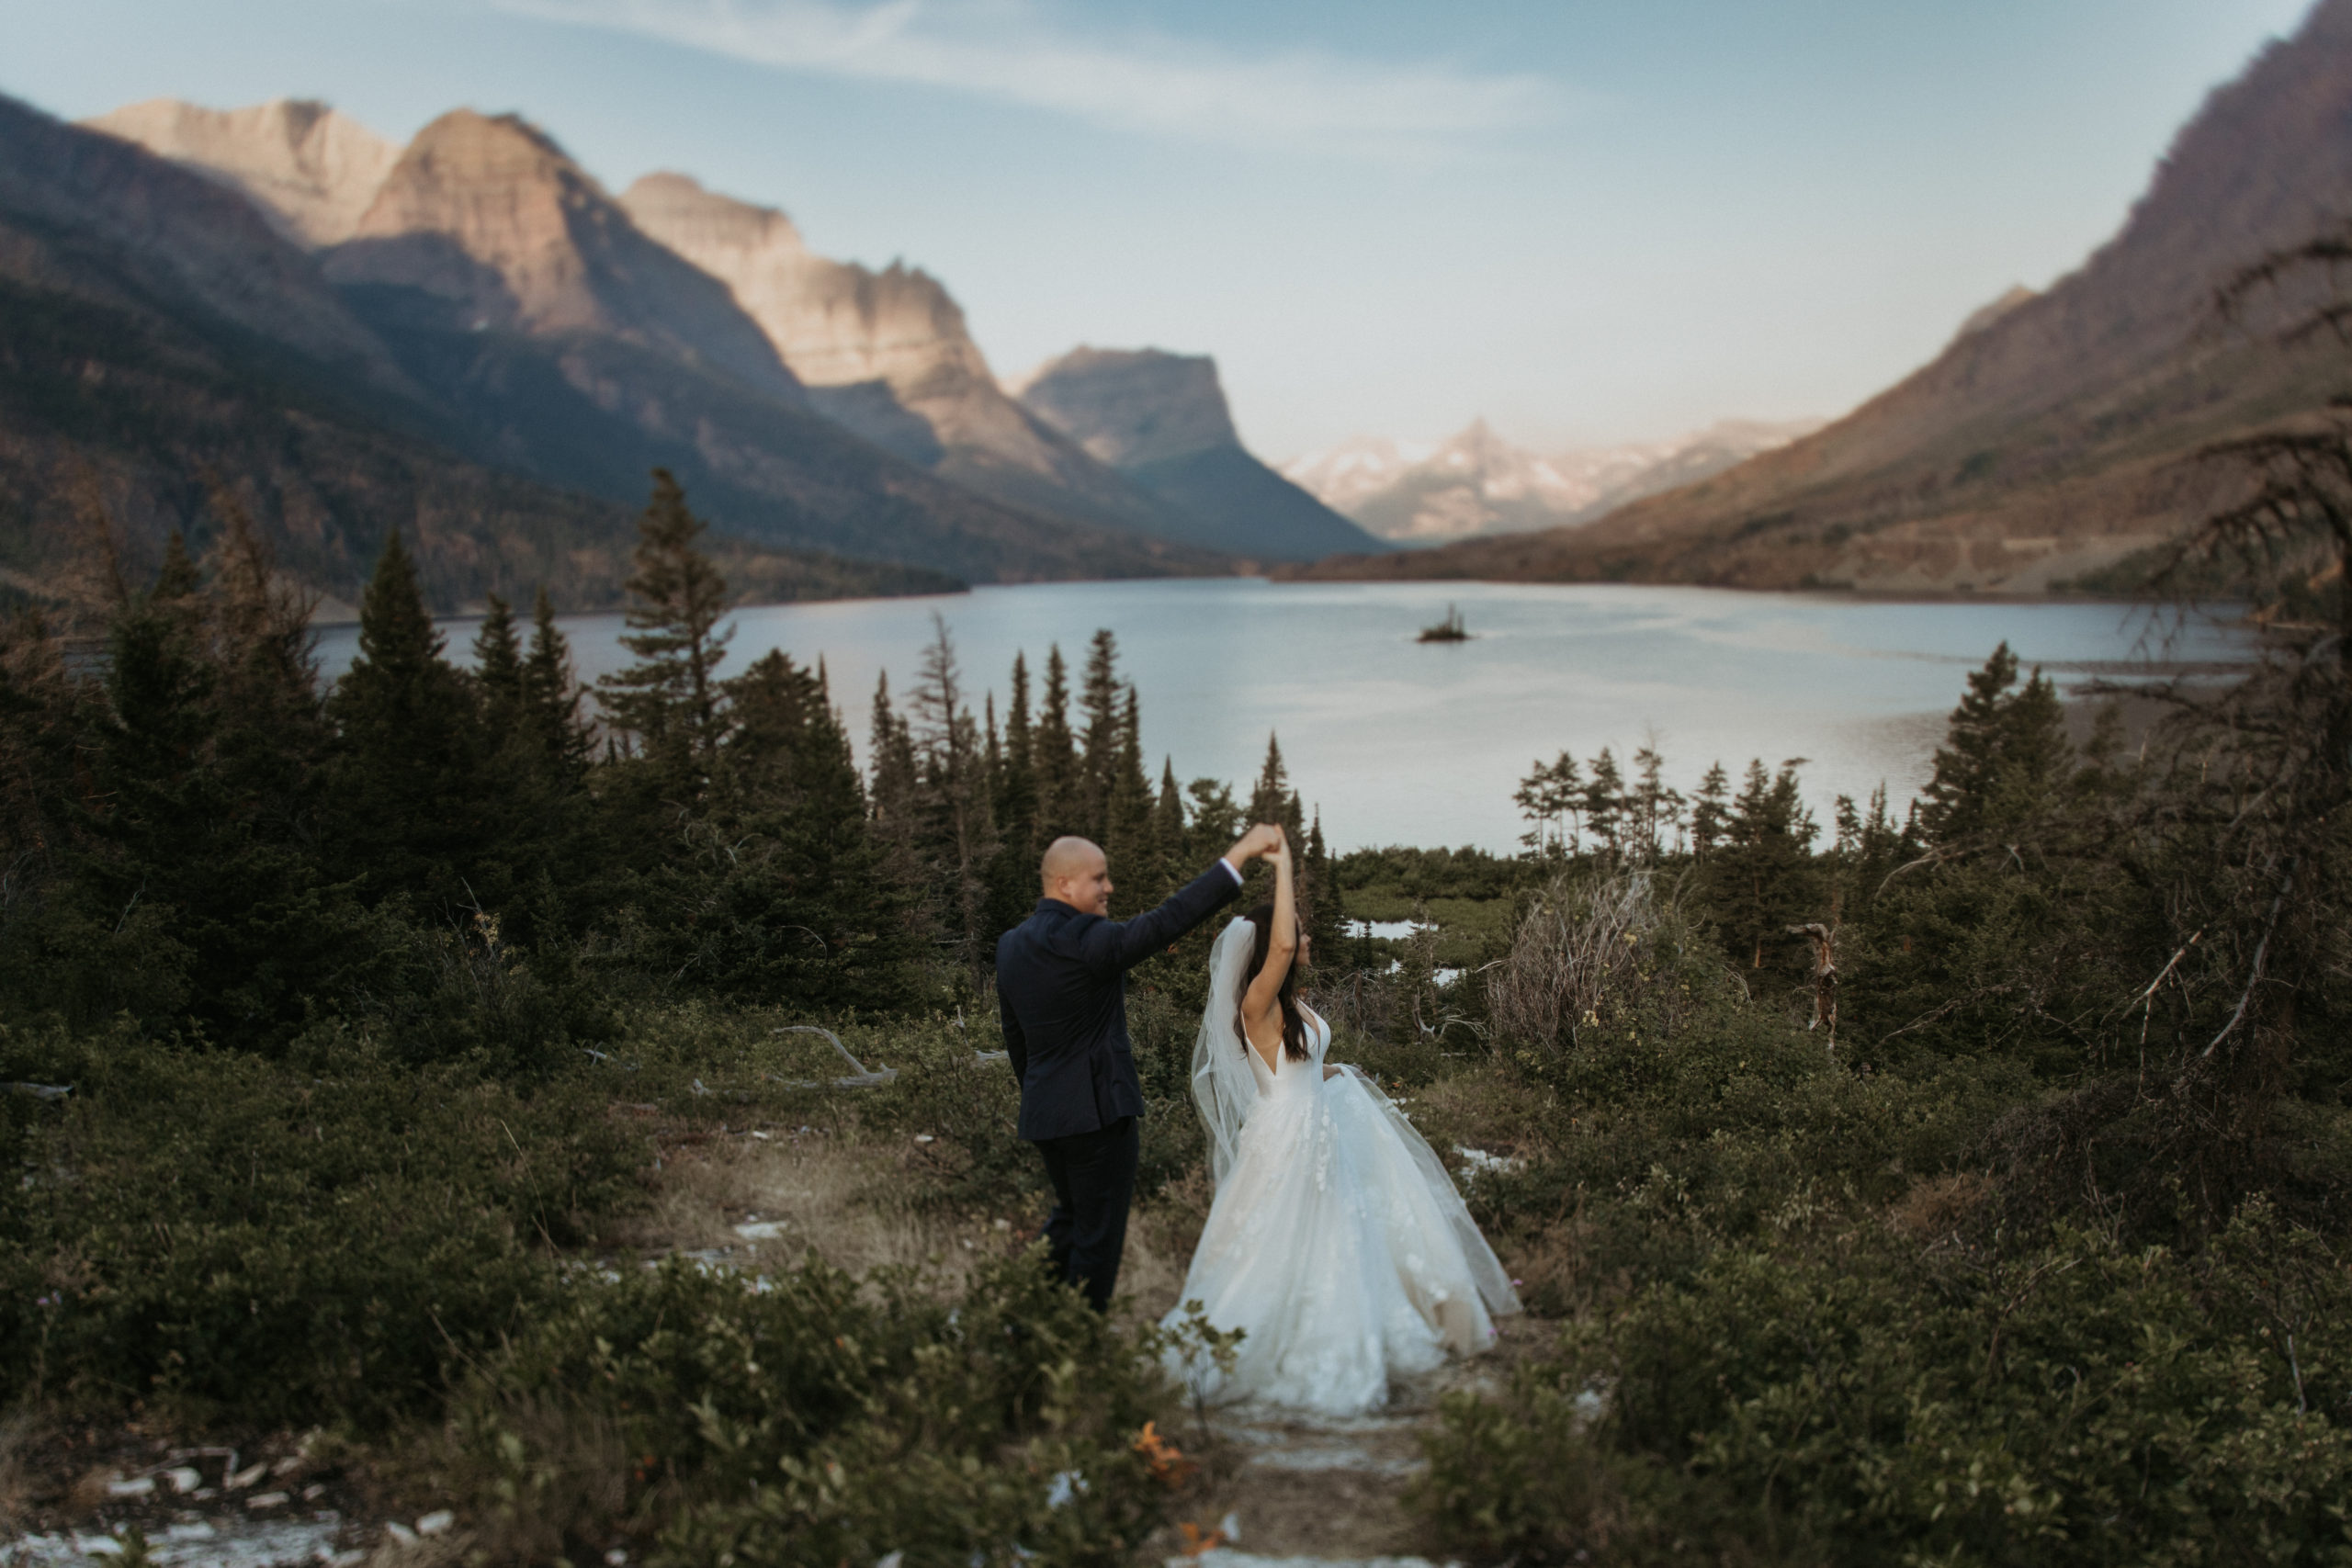 Bride and groom dancing by the lake in the mountains of Glacier National Park at sunrisee